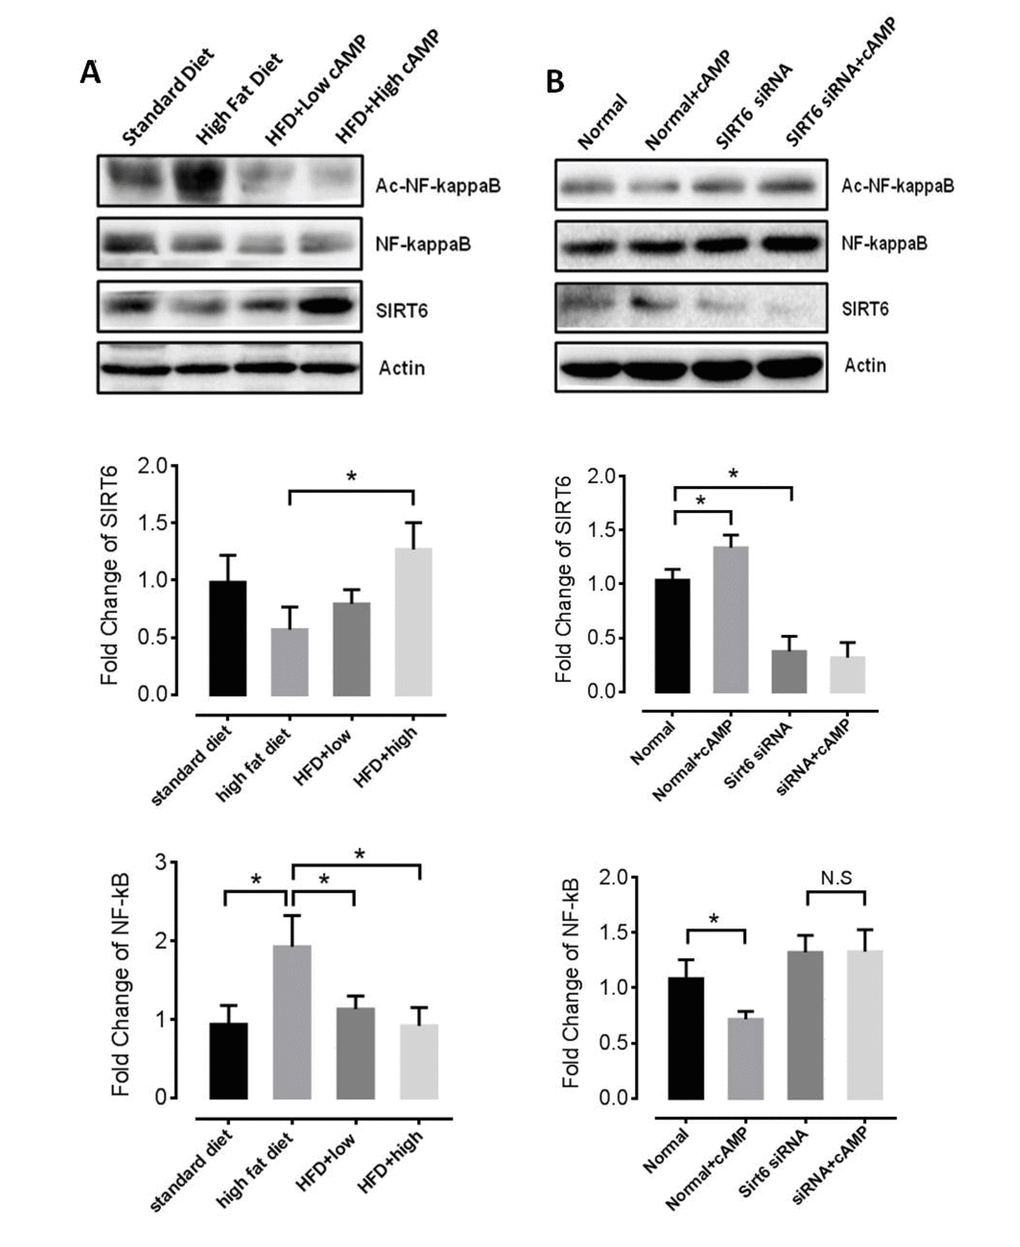 Roliparm decreases levels of acetylated NF-κB. (A) SIRT6 protein and NF−κB acetylation level of HFD-fed mice with or without db-cAMP treatment. (B) SIRT6 and acetylated NF-κB levels in Sirt6 knockdown and control cells, with or without db-cAMP treatment.